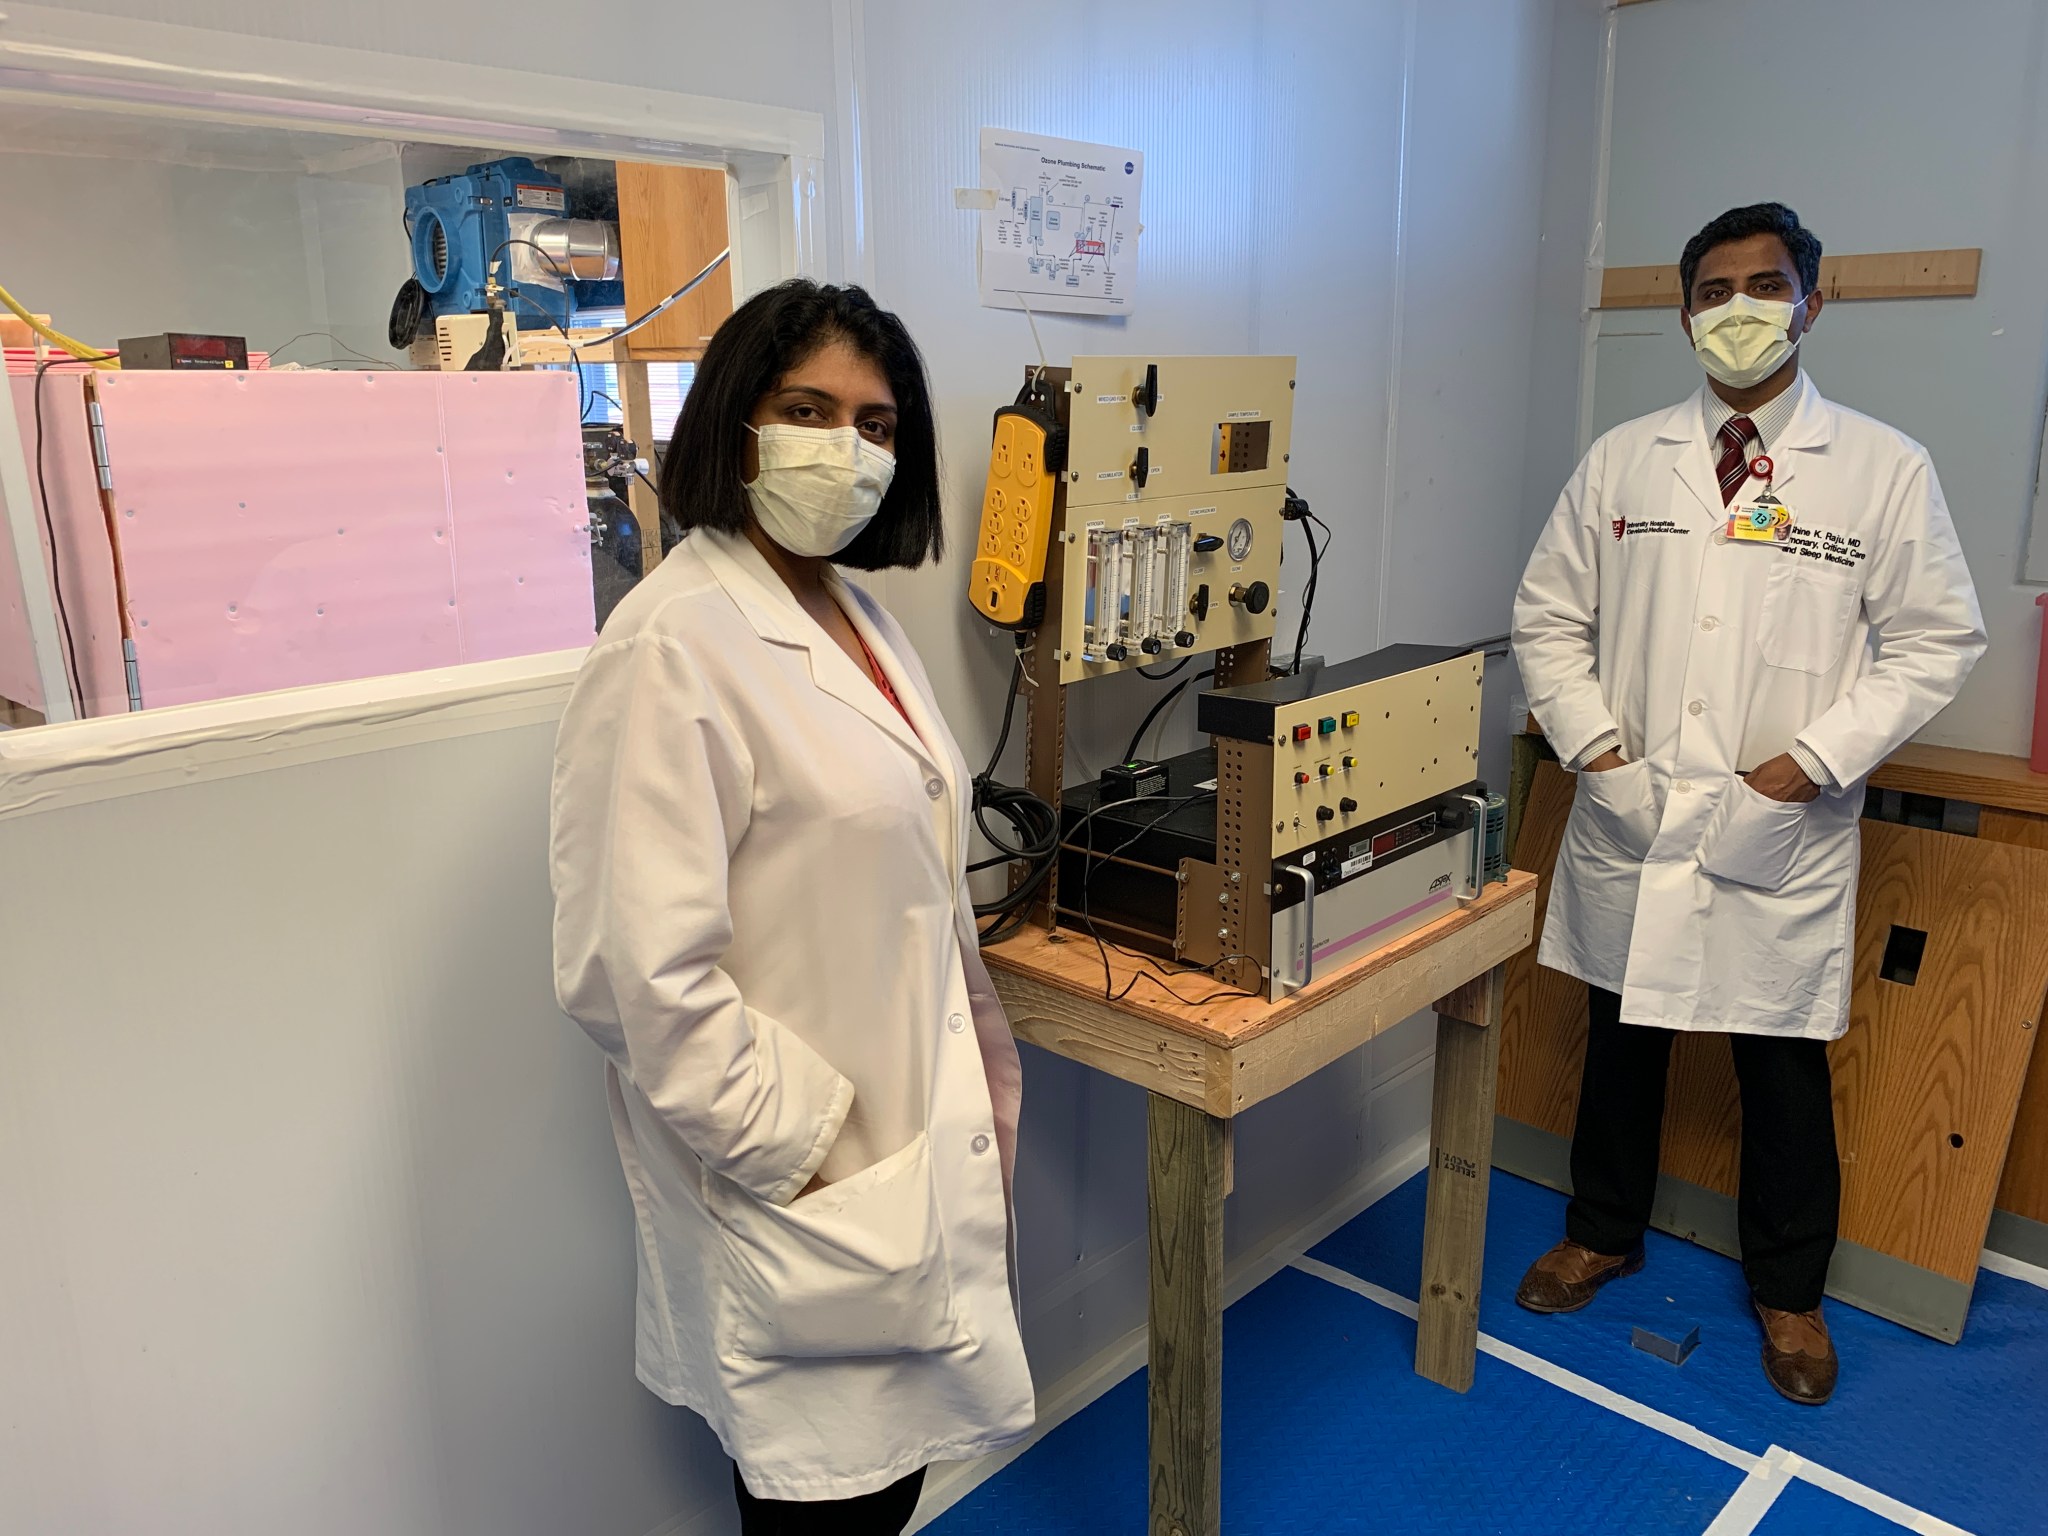 Female and male doctor, wearing masks, standing on either side of the device.